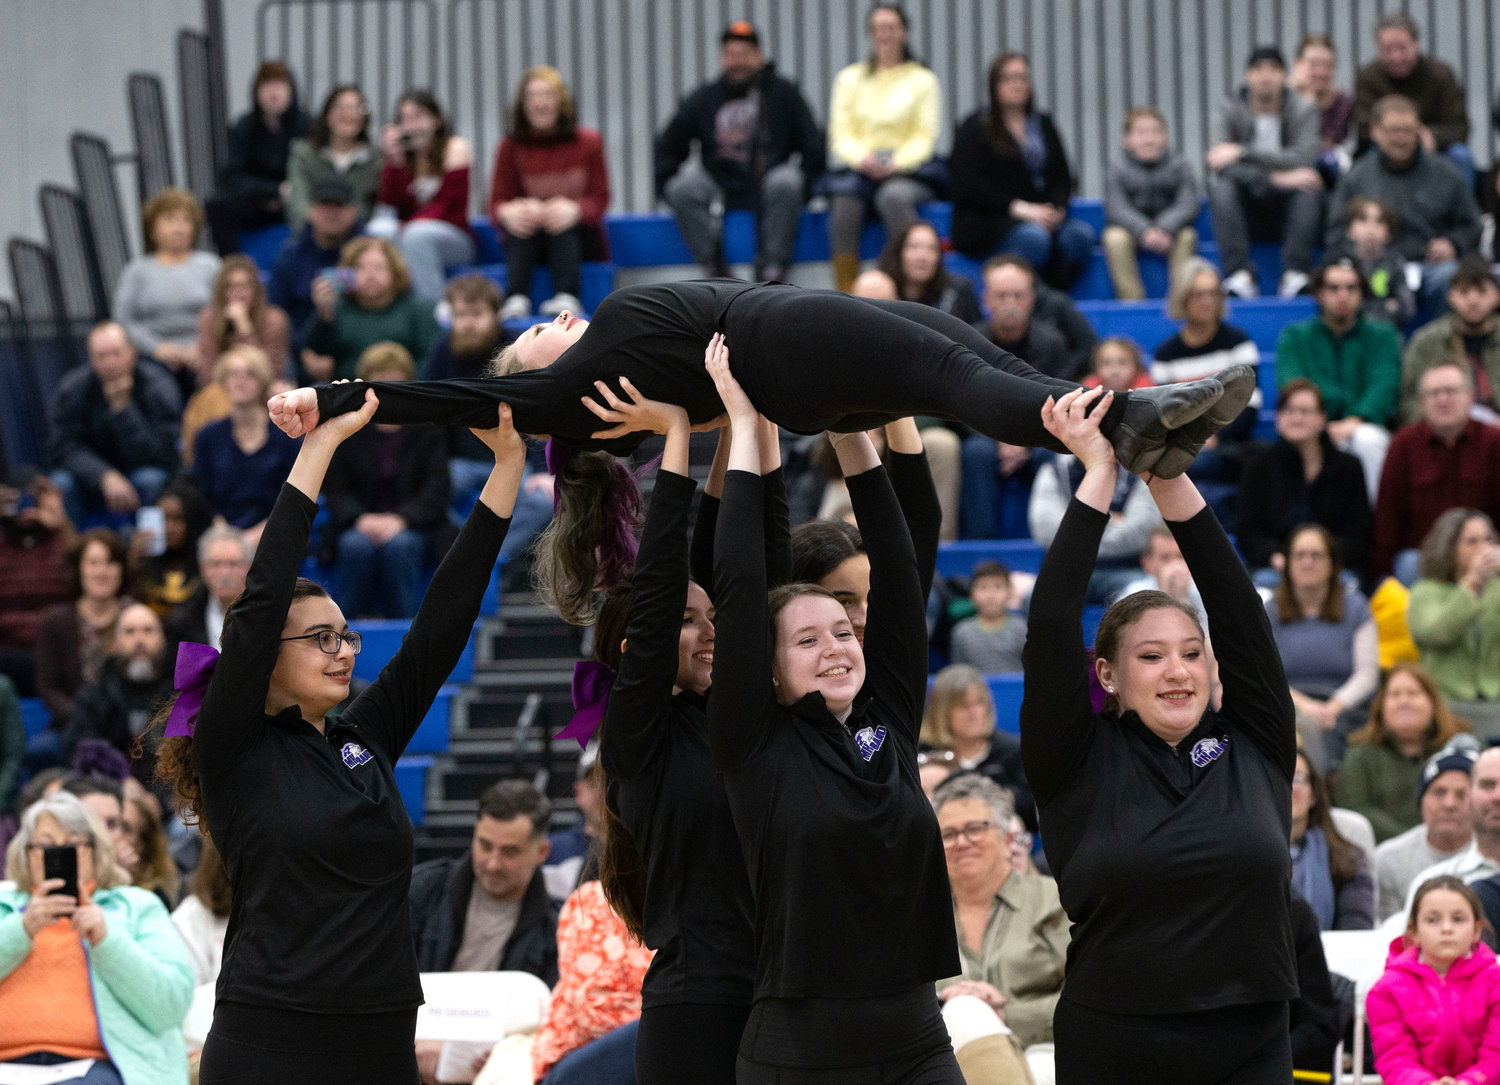 Delaney Clays (middle) and the dance team perform with the Mt. Hope Marching Band during I want to Hold Your Hand.